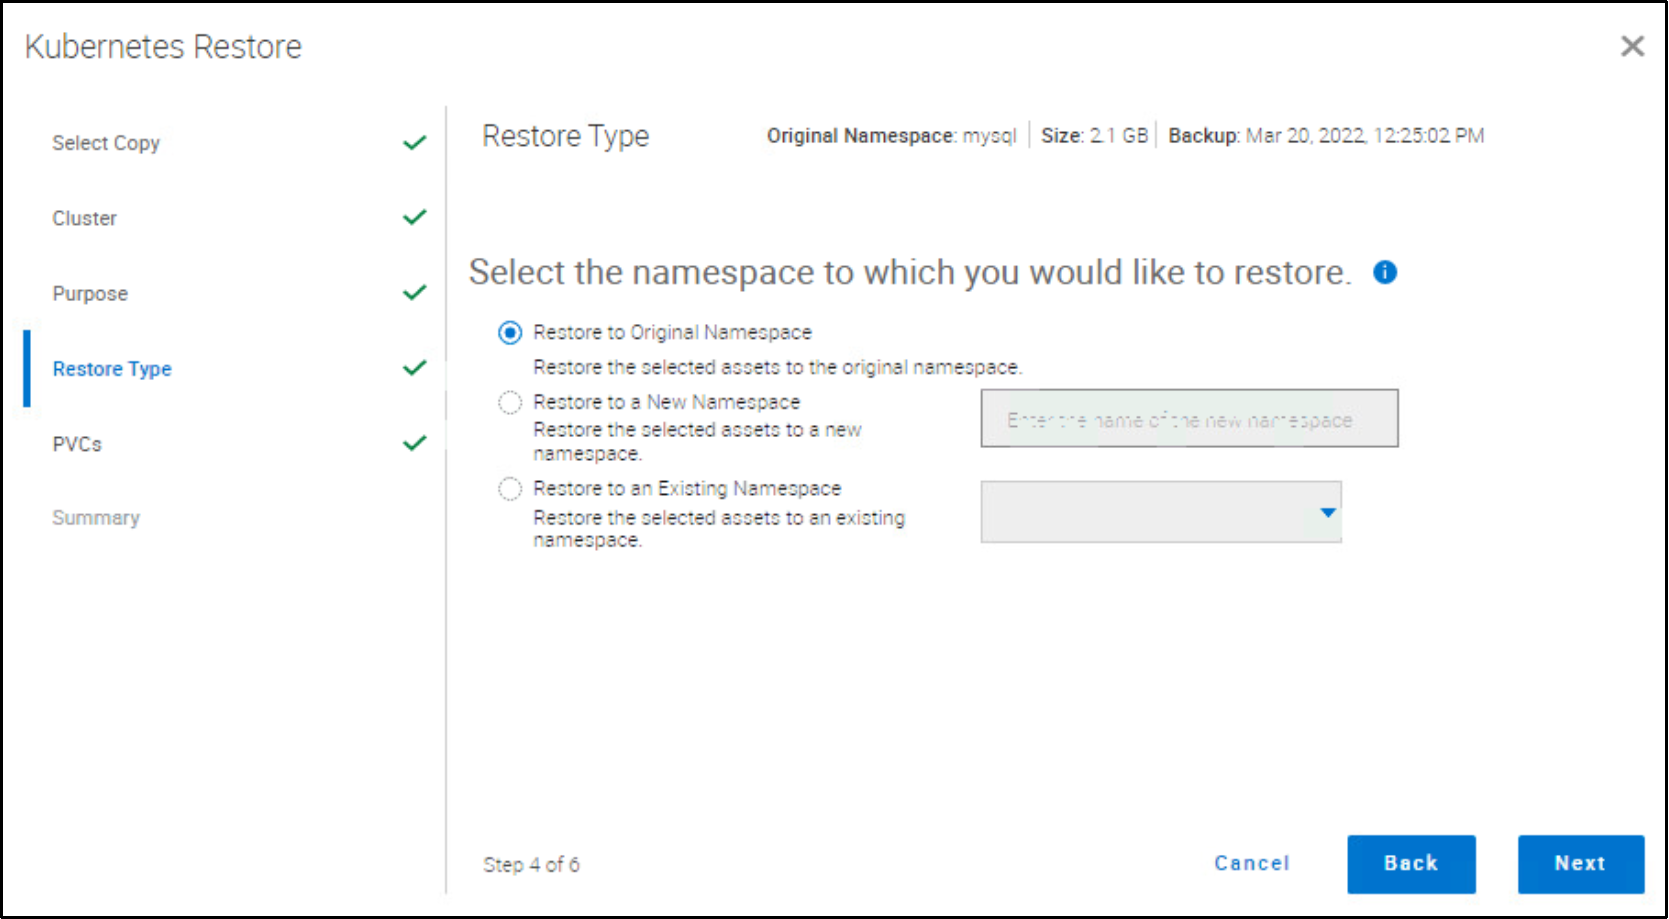 The image shows the restore options such as Restore to the original namespace, to the new namespace, and to the existing namespace.